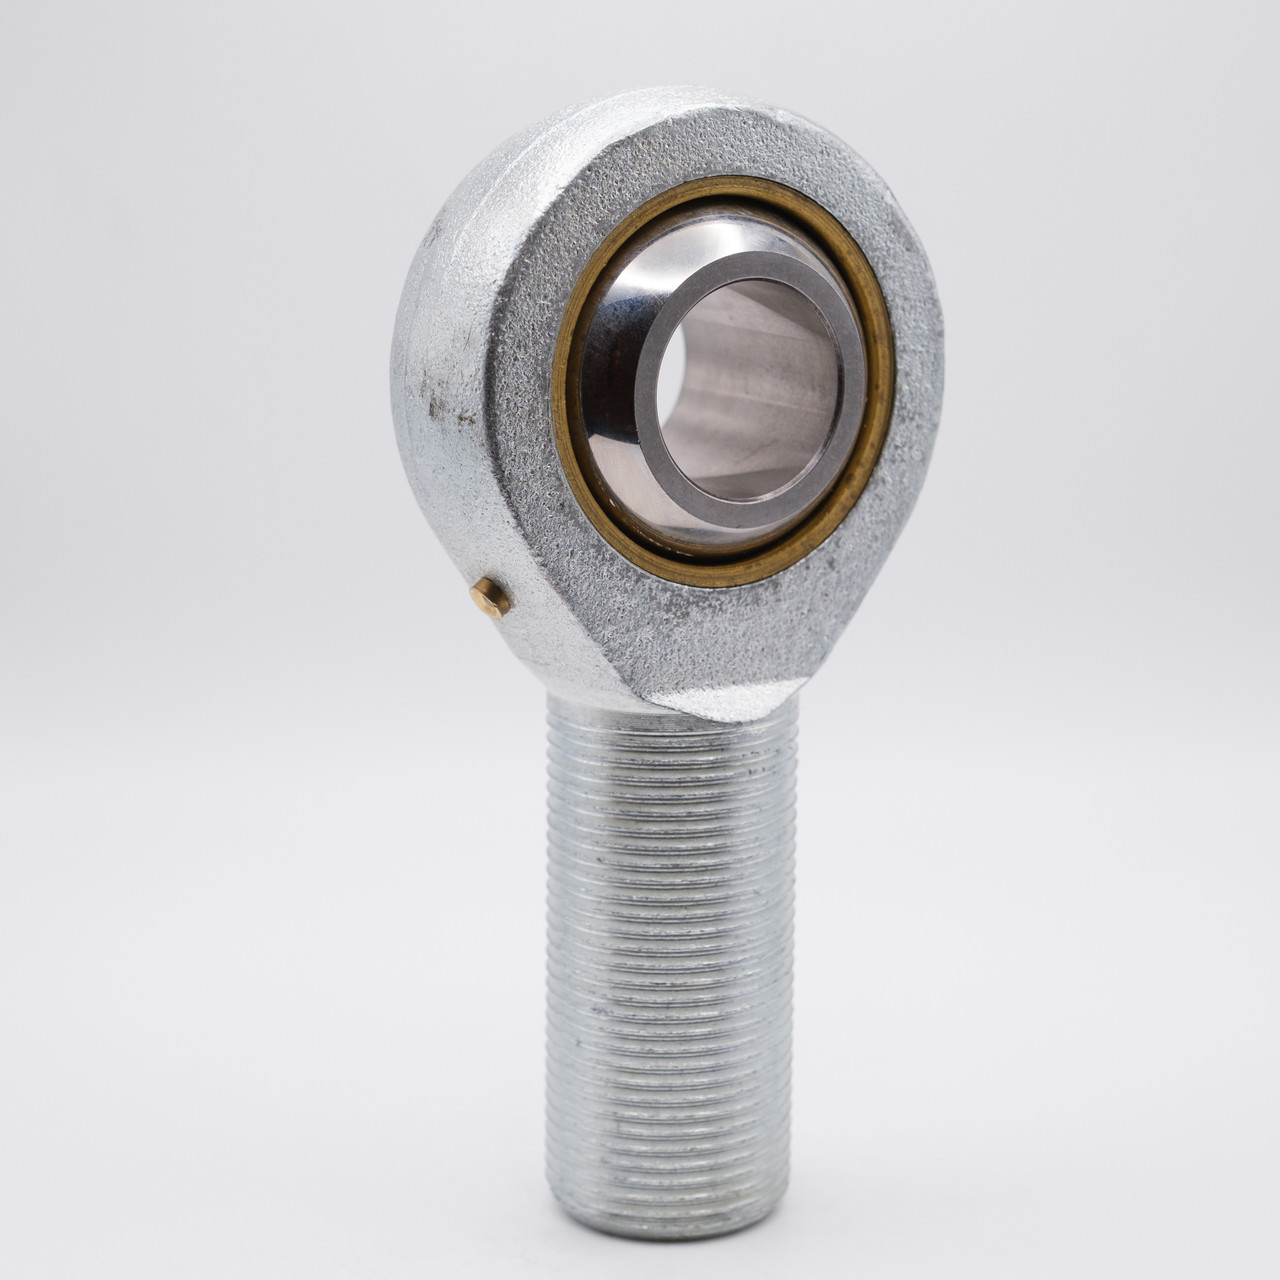 POS20 Rod-End Bearing 20mm Bore Side View